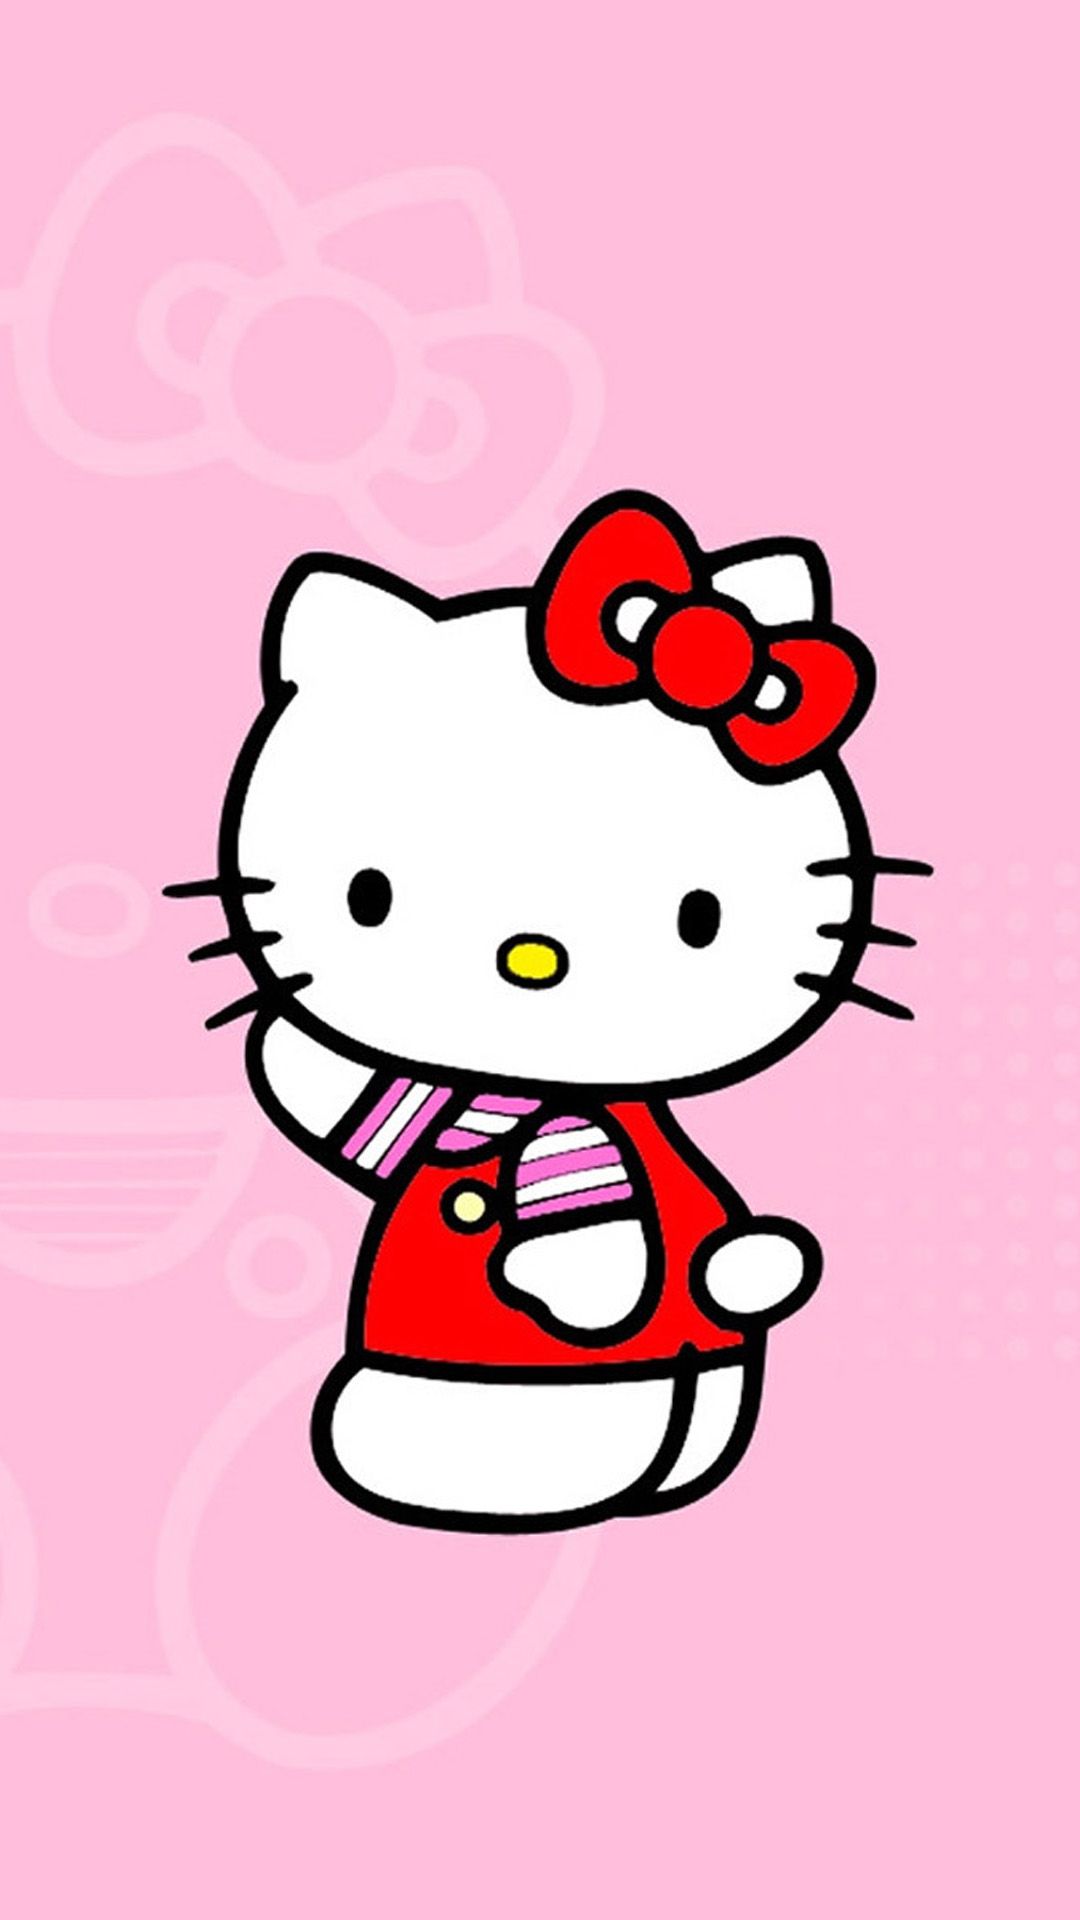 Cute Hello Kitty iPhone 6 Wallpaper Download iPhone Wallpapers